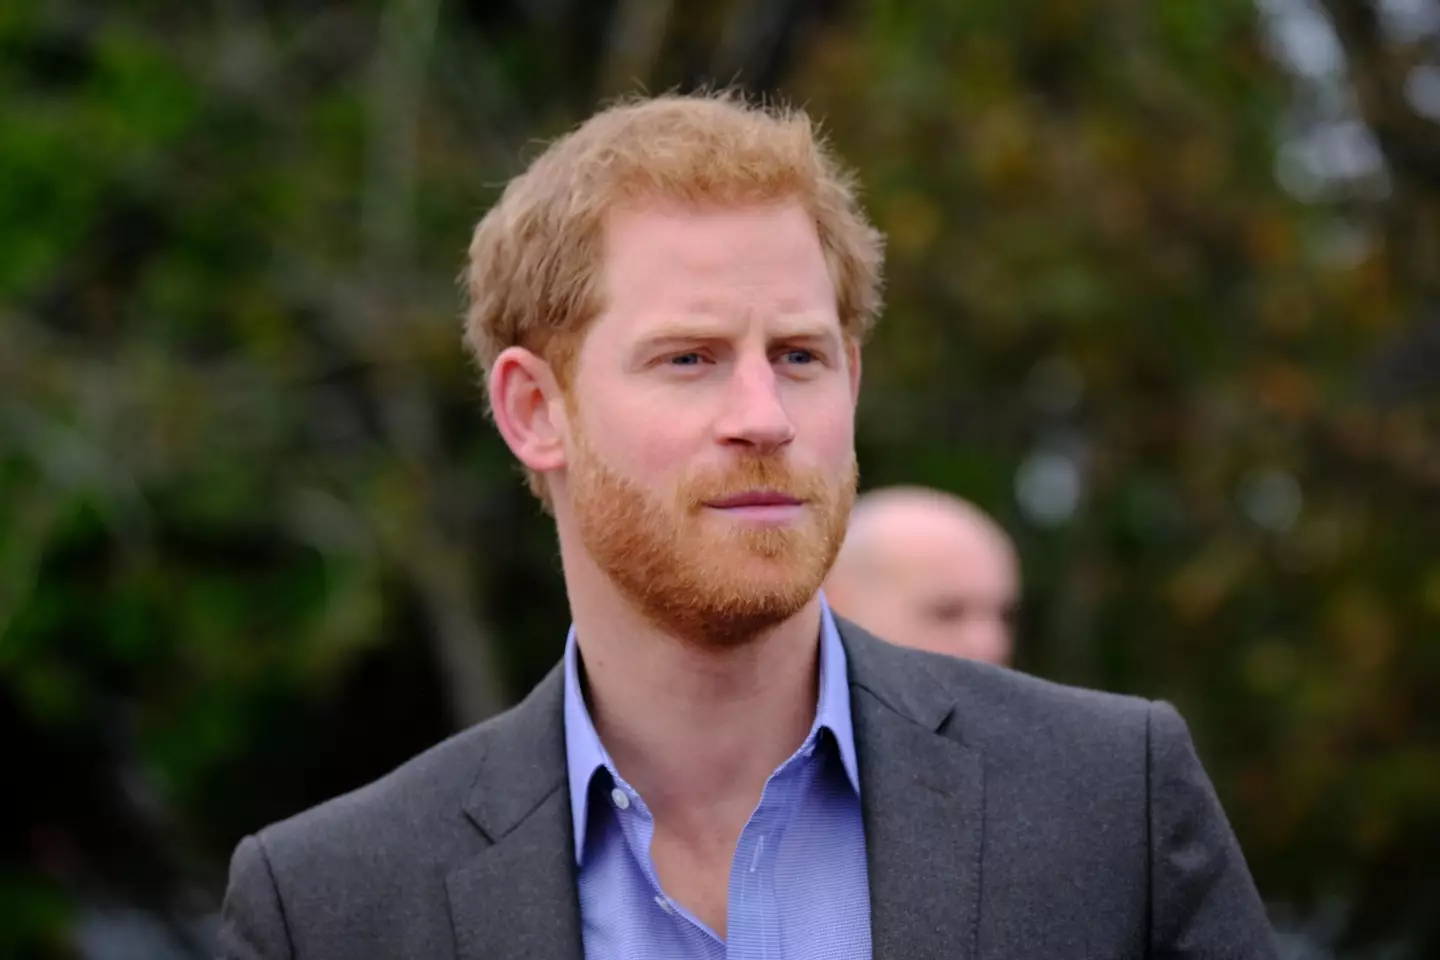 Prince Harry's real name is not actual Harry.